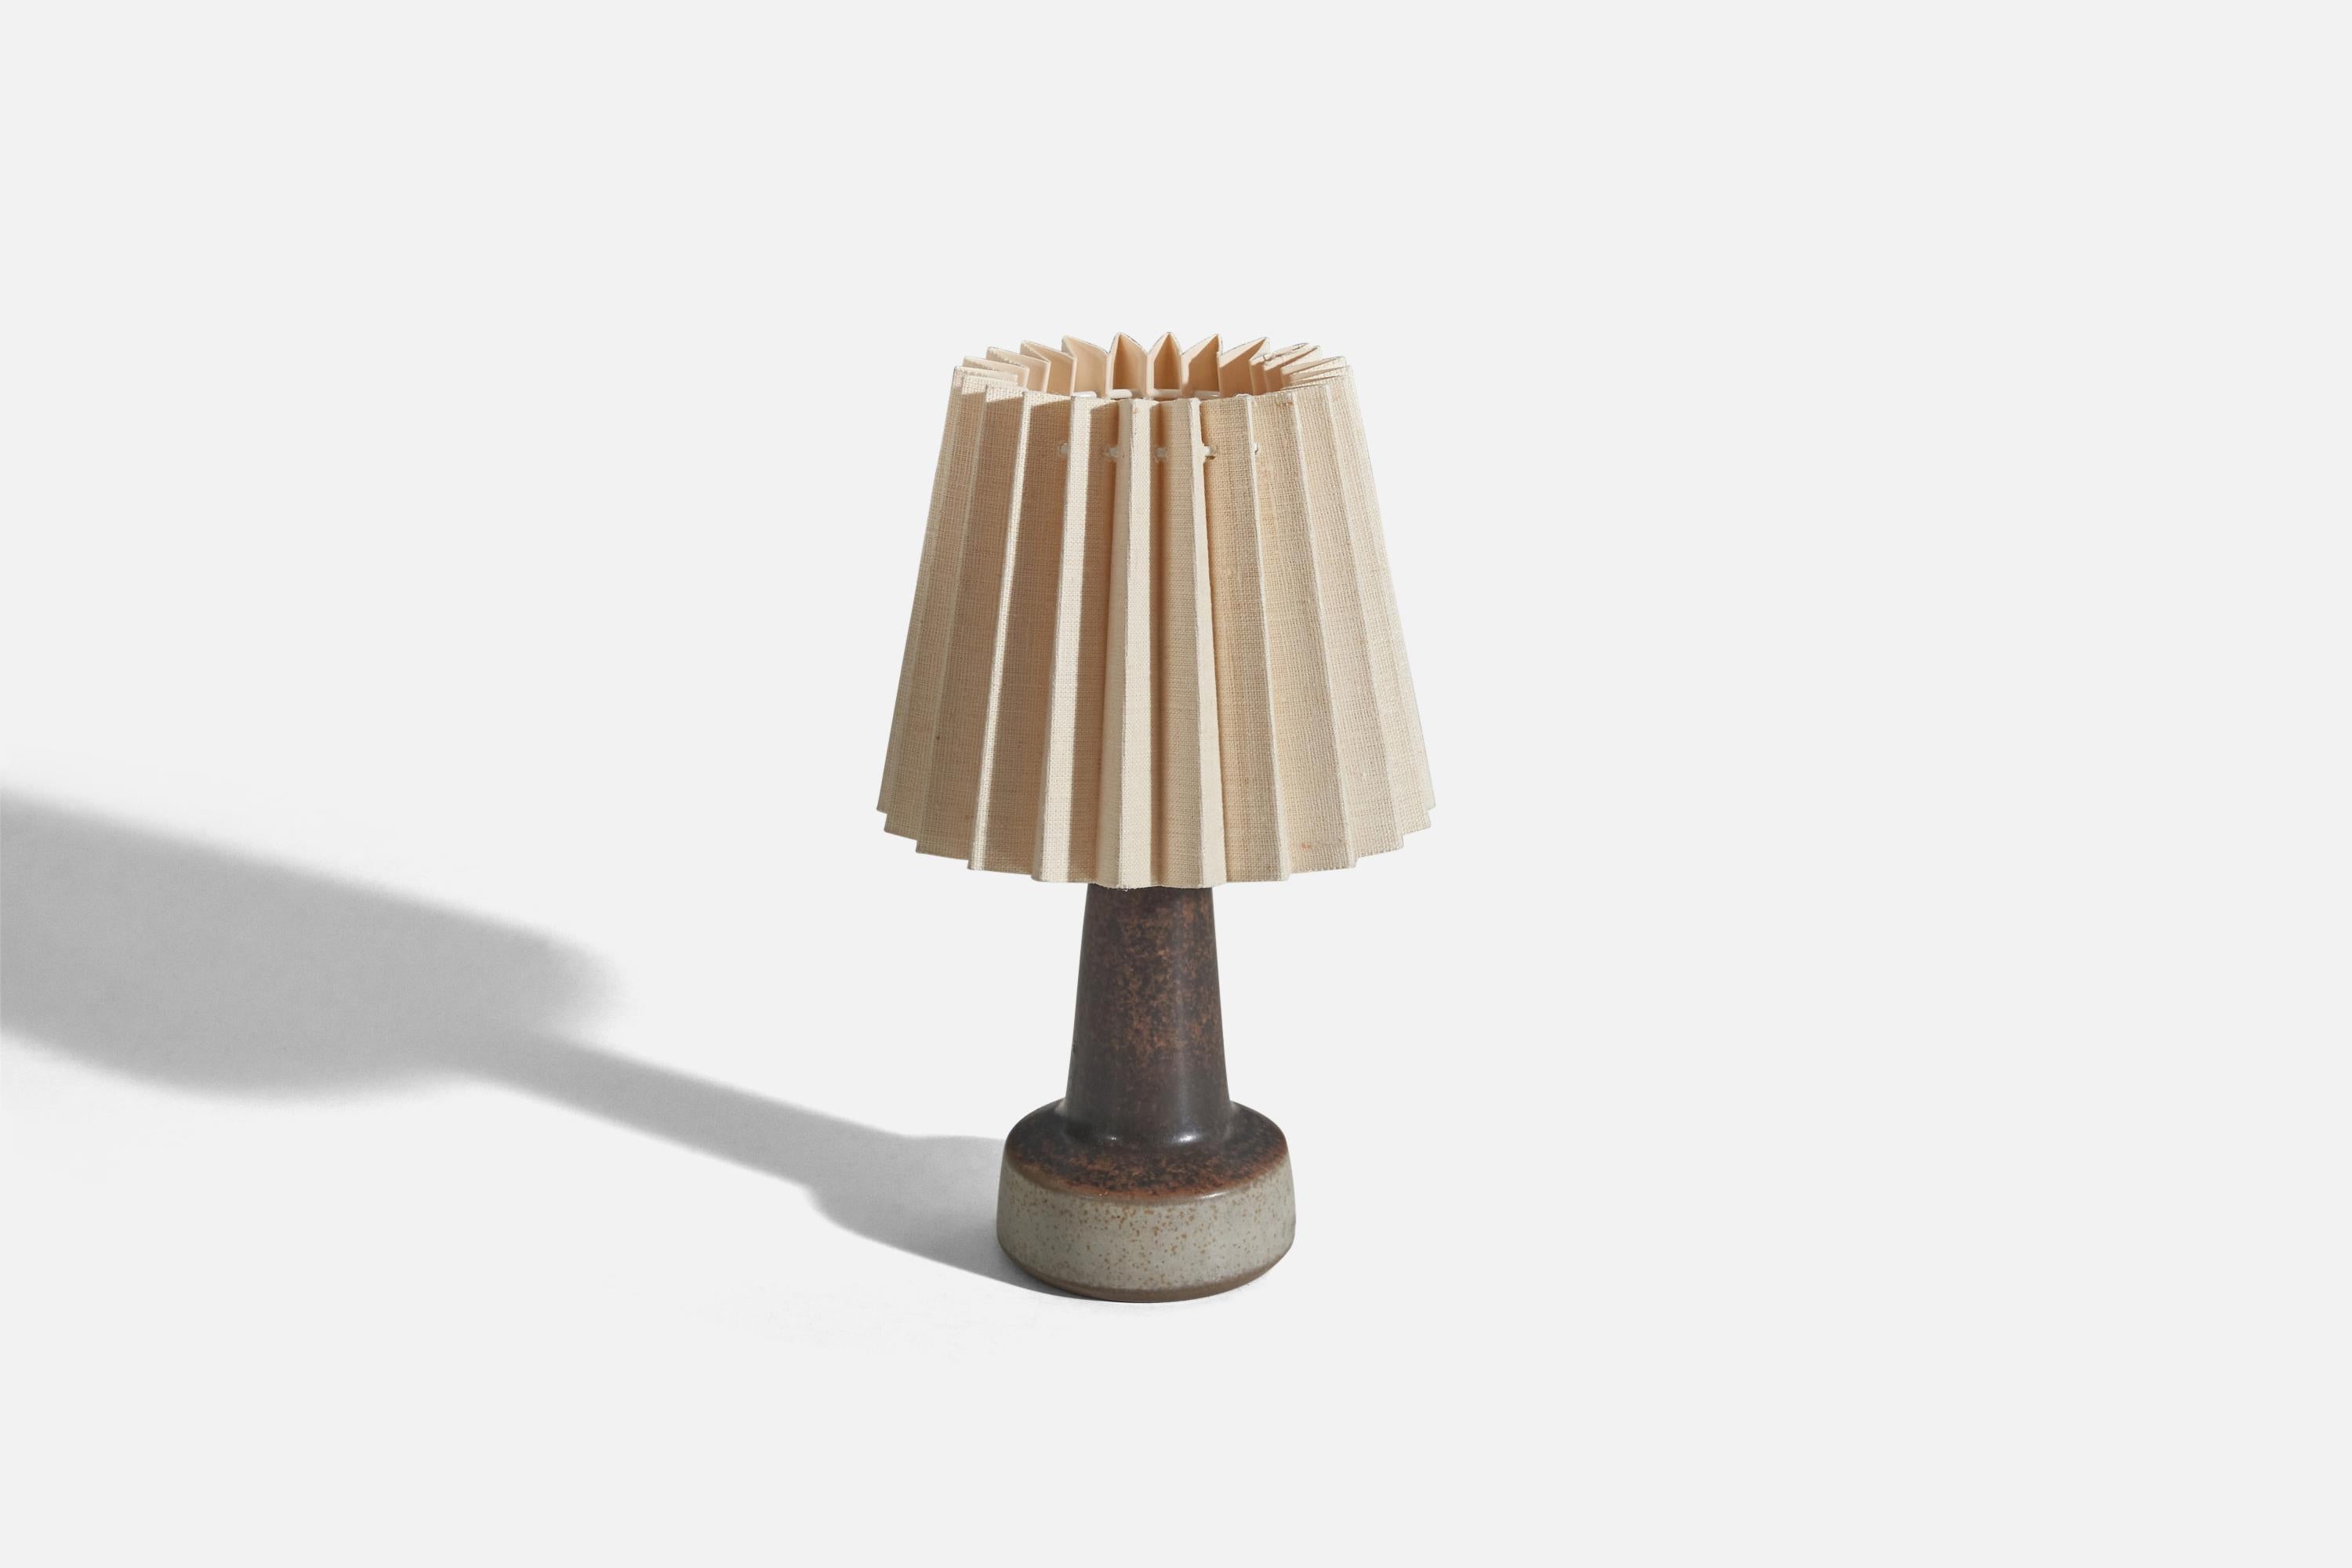 A brown and gray, glazed stoneware table lamp designed and produced by Michael Andersen Keramik, Denmark, 1960s.

Sold with lampshade. 
Dimensions of Lamp (inches) : 8.25 x 3.82 x 3.82 (Height x Width x Depth)
Dimensions of Shade (inches) : 4.62 x